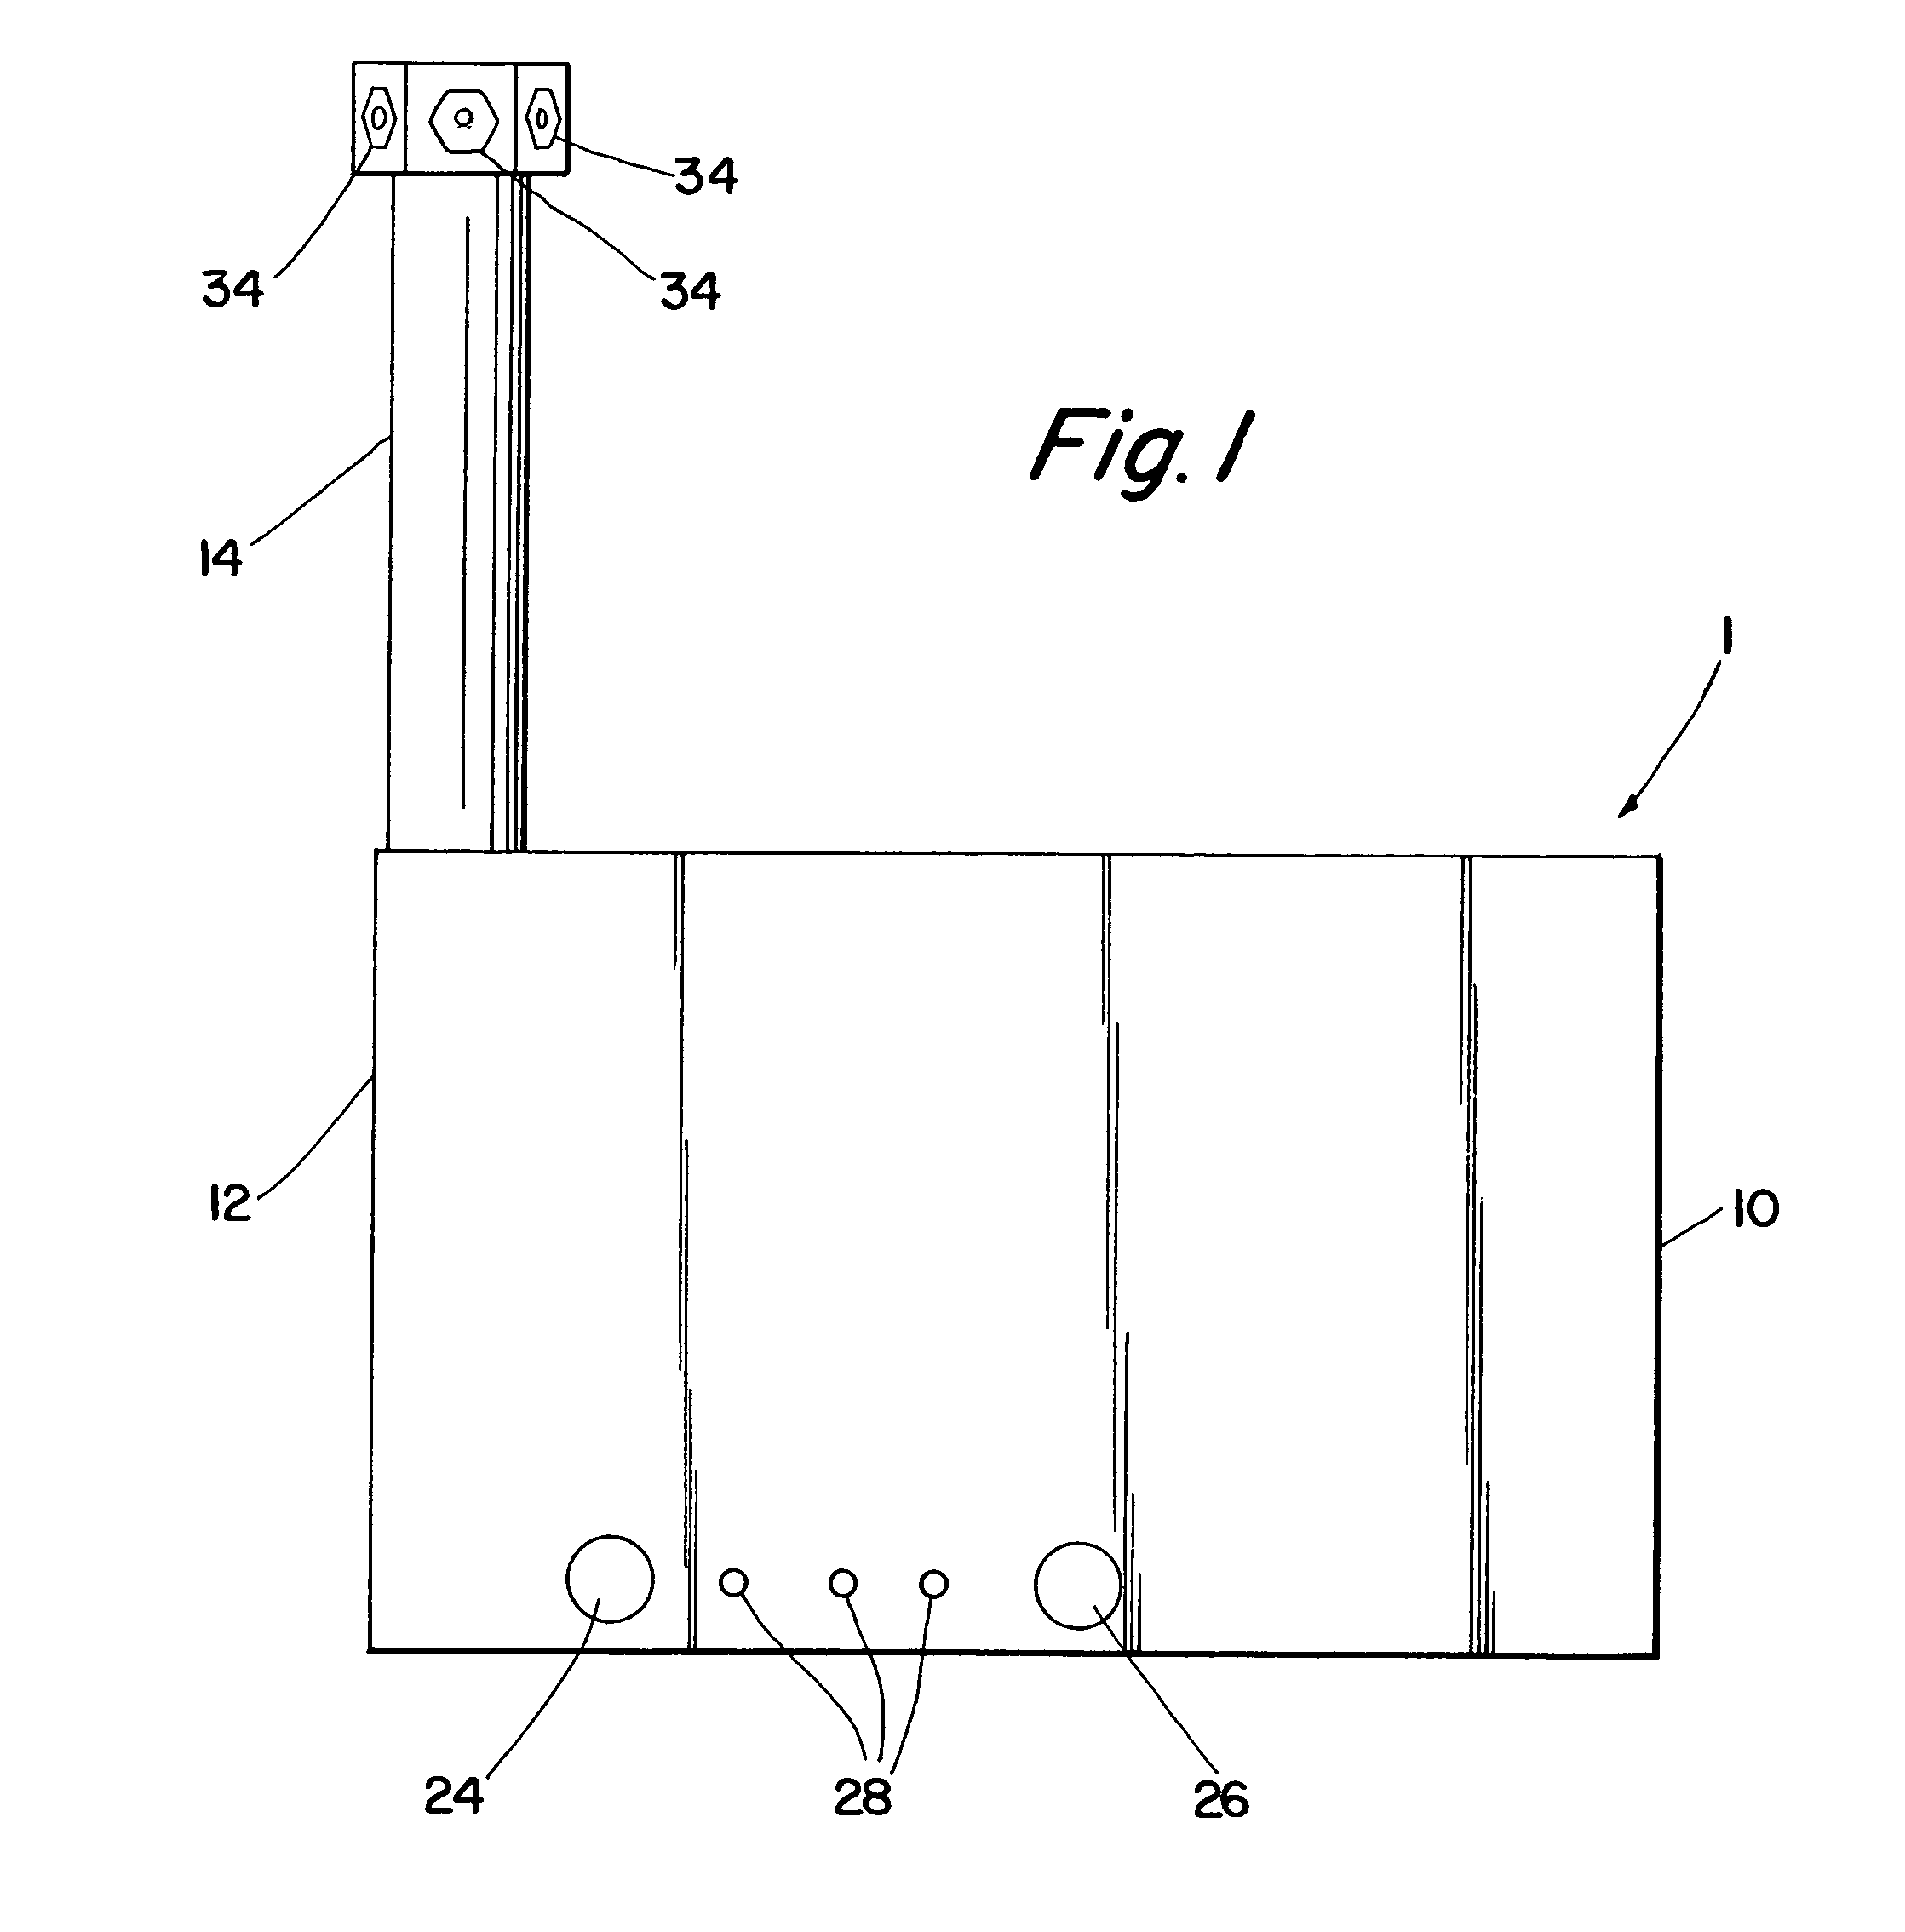 Apparatus for cooling fluids